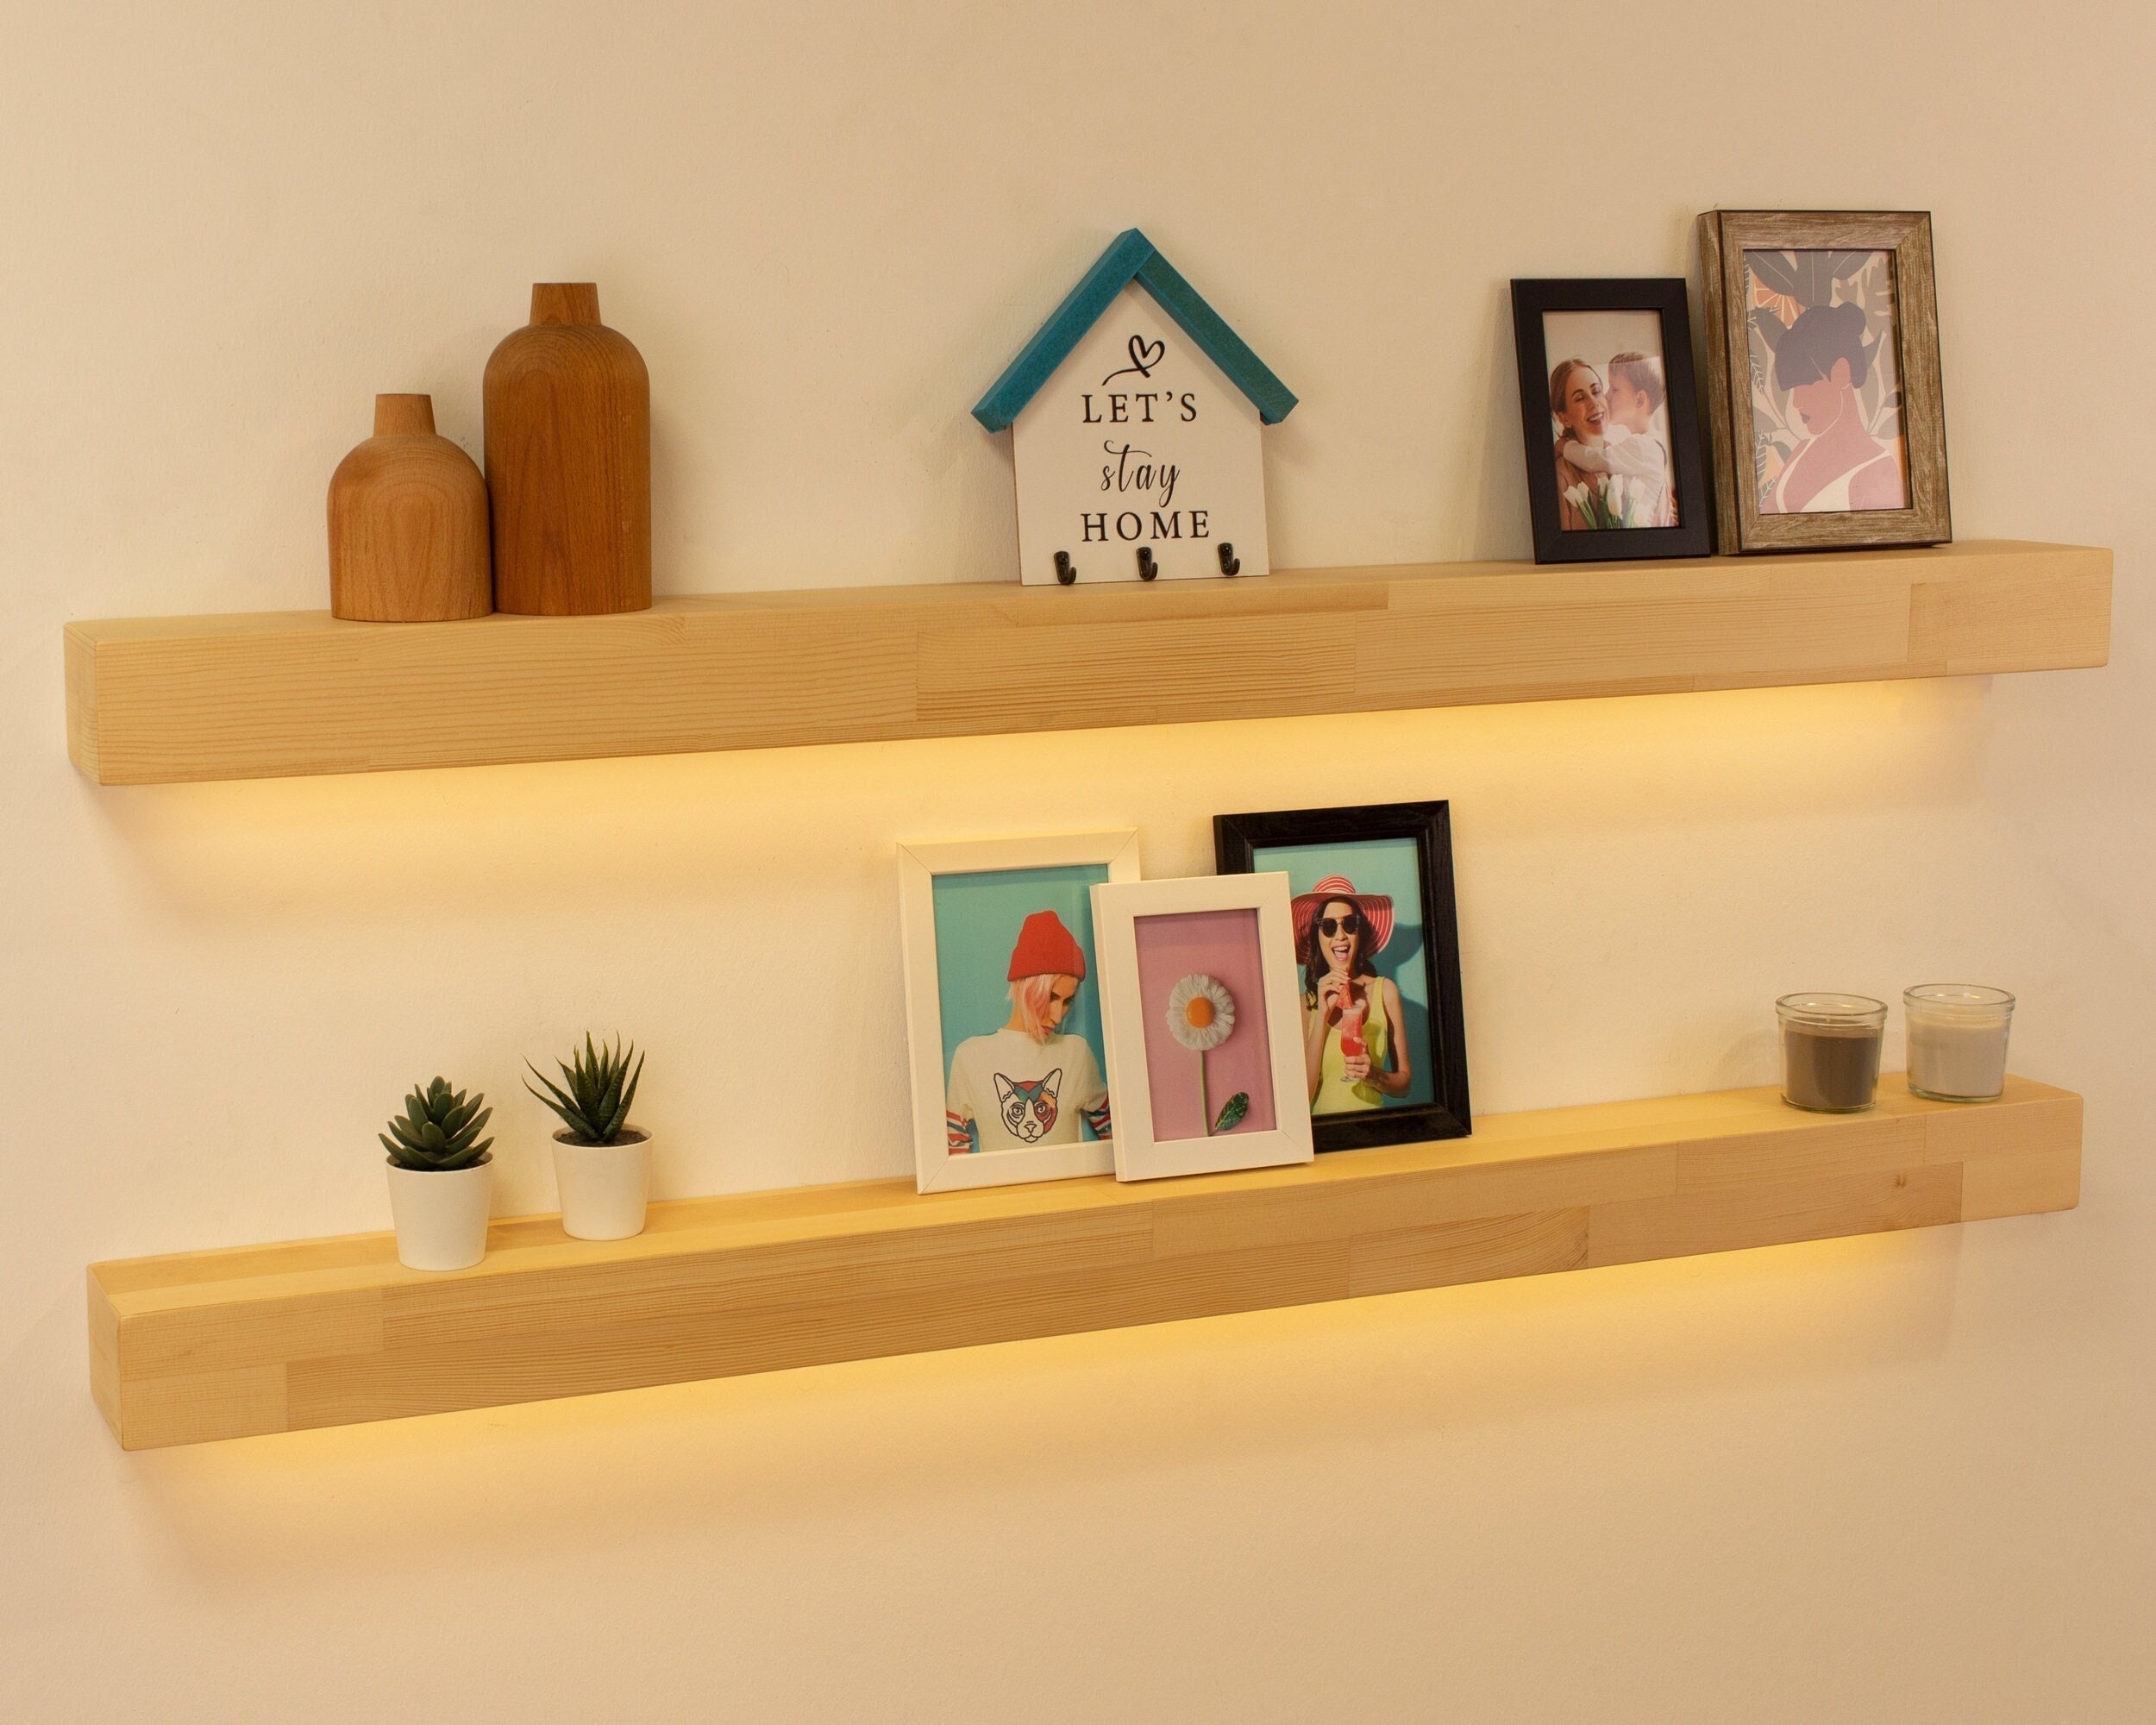 12 X 2 Inch White Wall Shelf Free Shipping Uses 3M Command -  Sweden